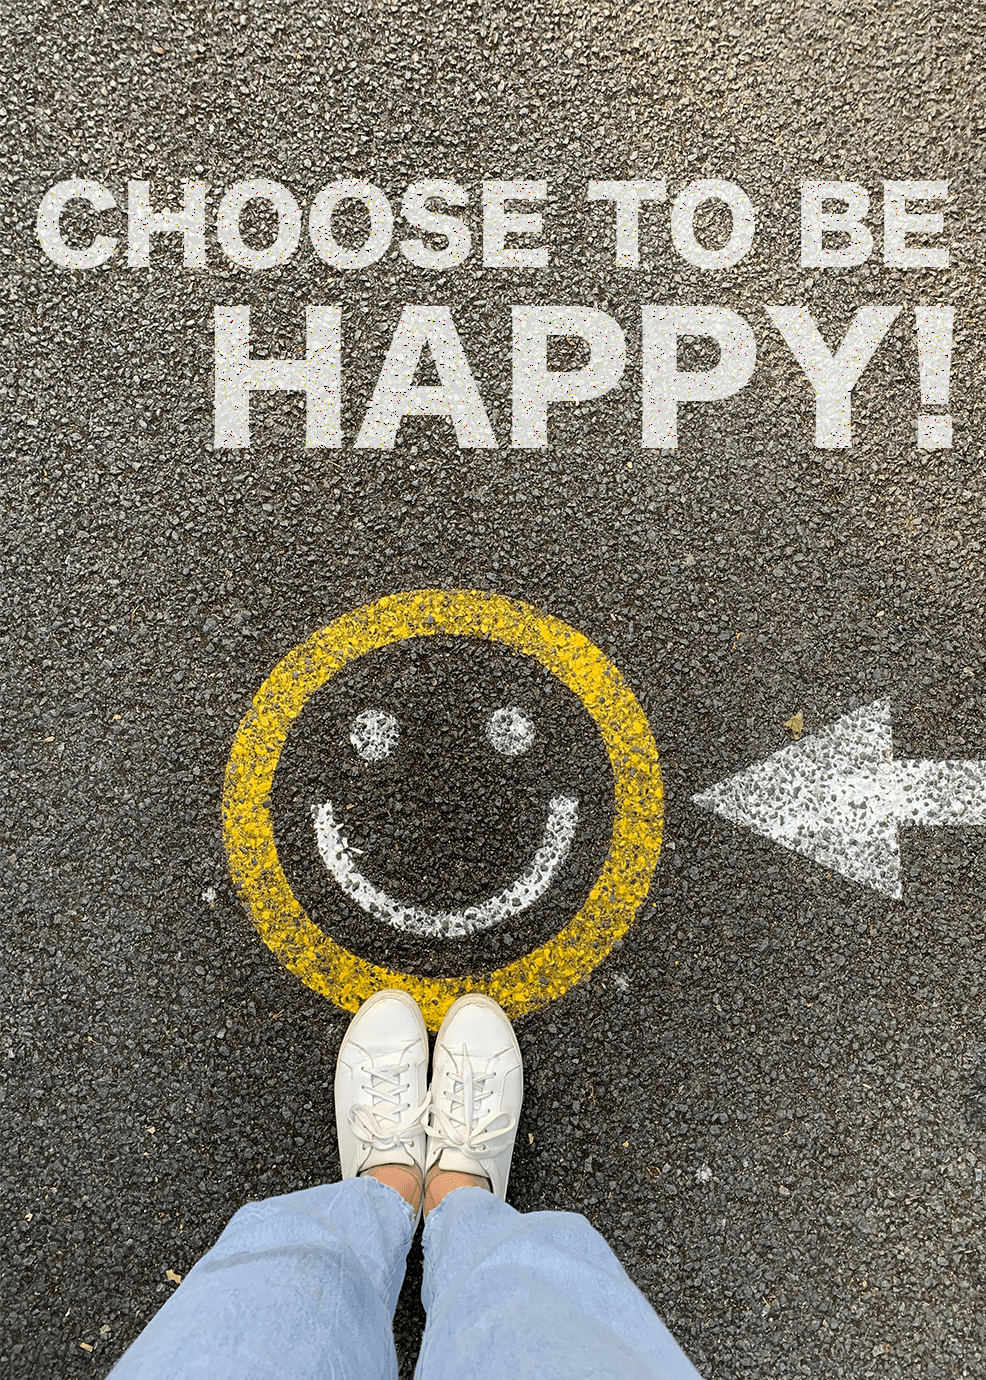 Choose To Be Happy!